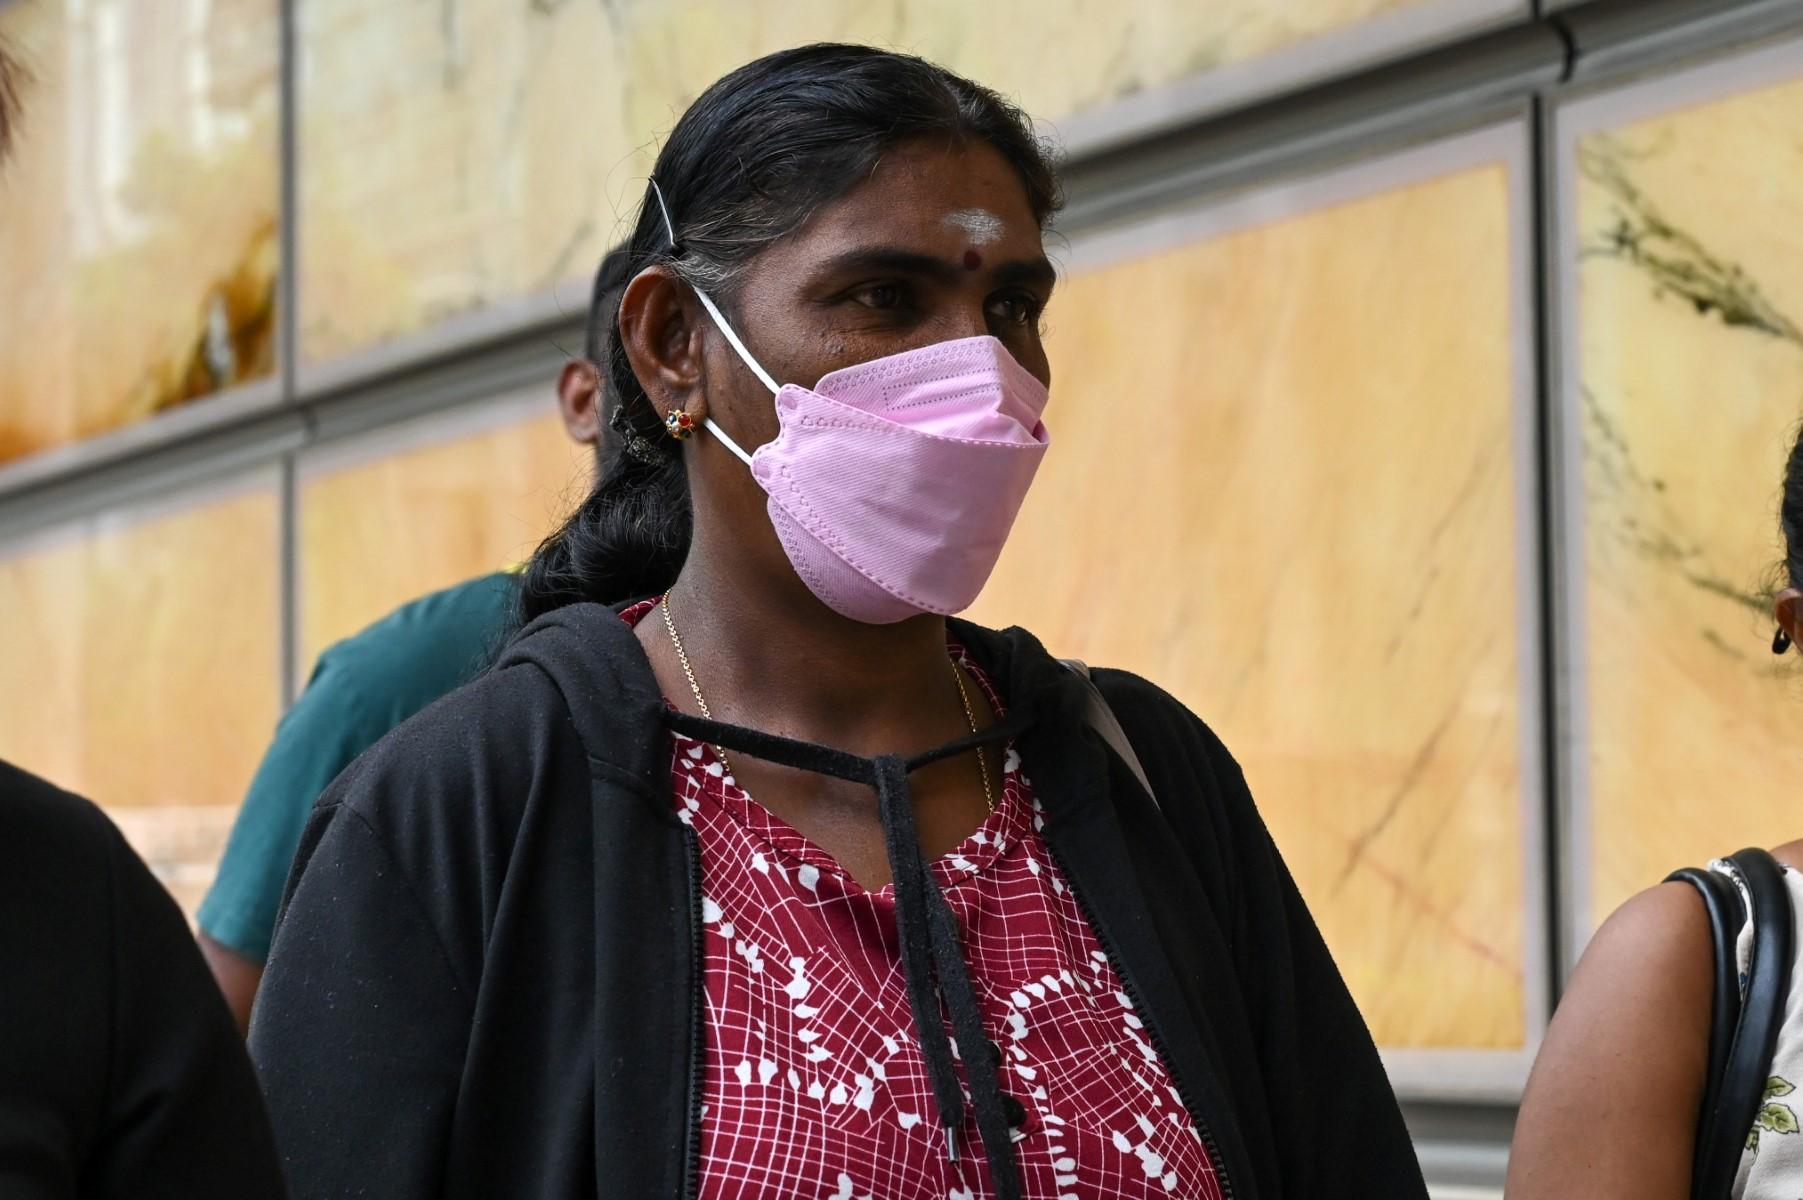 Nagaenthran K Dharmalingam's mother, Panchalai Supermaniam, arrives at the Supreme Court in Singapore on April 26 for her son's final appeal before his execution. Photo: AFP